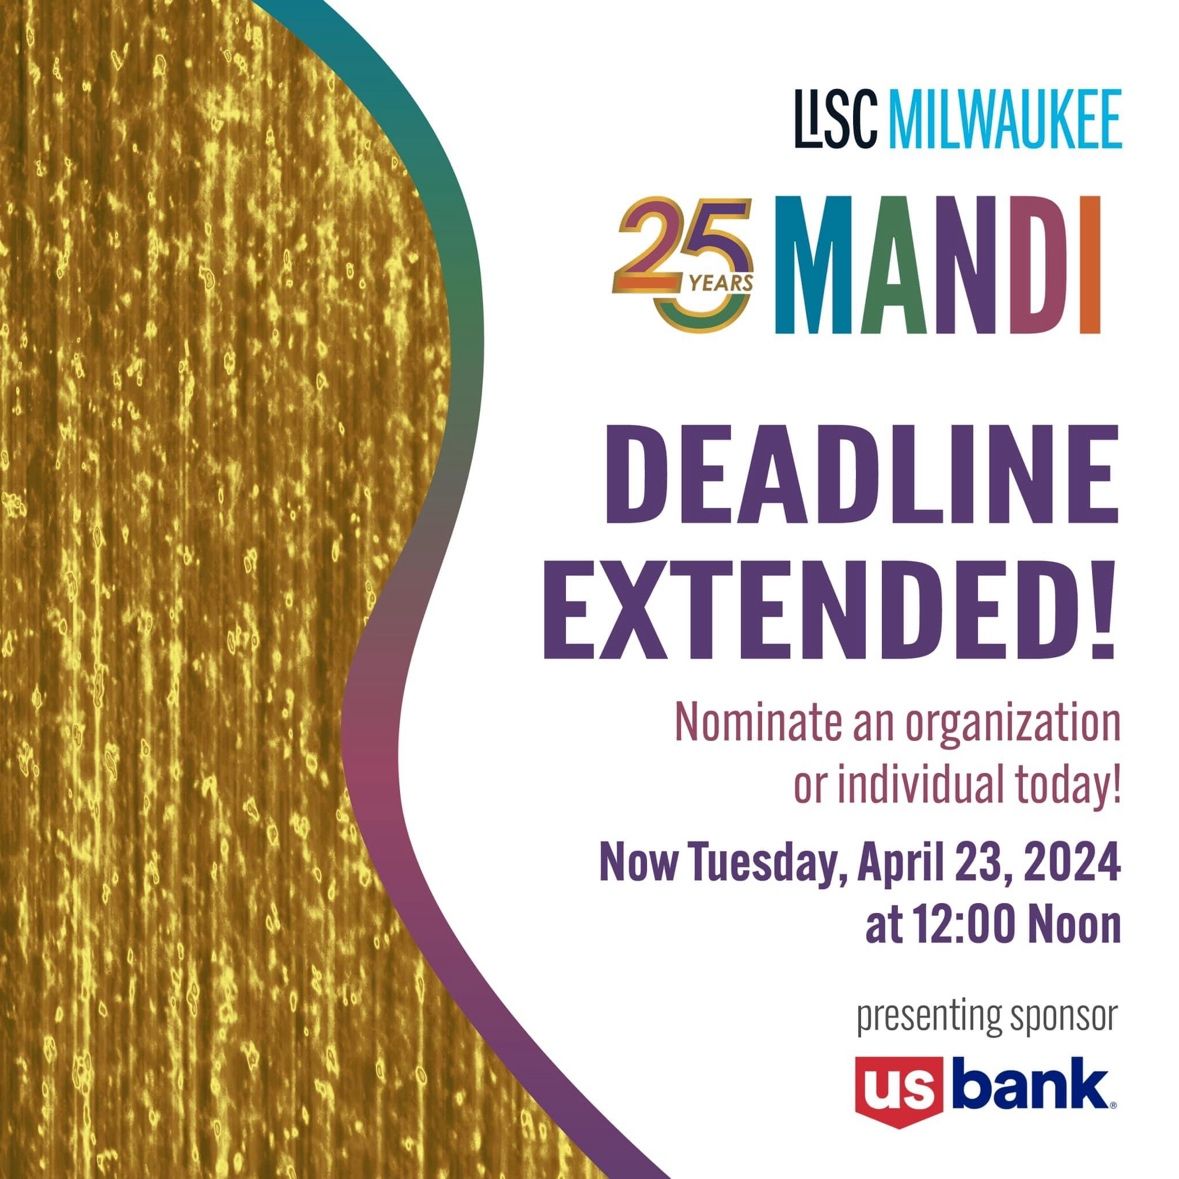 🚨 Deadline Extended! 🚨 The application deadline for the 2024 #MANDIs is now tomorrow: Tues., 4/23! Follow the link for more information on award eligibility and selection criteria and to submit a nomination: mandiawards.com @LISC_Milwaukee